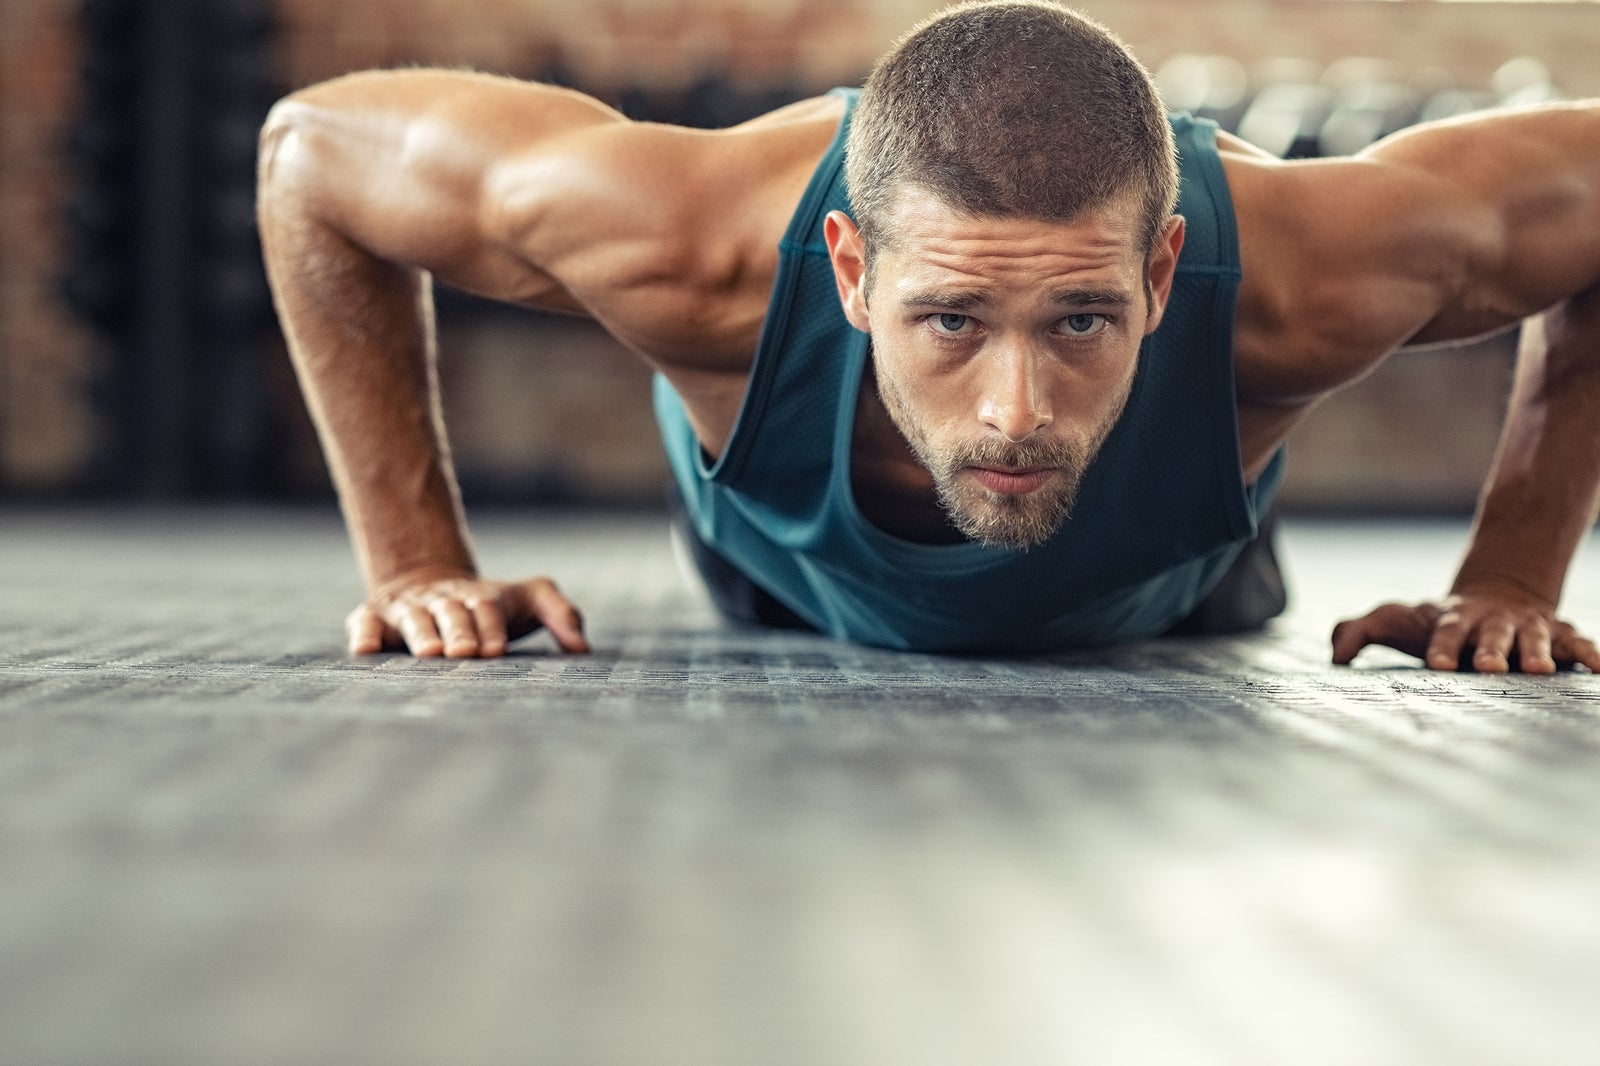 Young athlete doing push ups as part of bodybuilding training. Muscular guy doing a pushup on floor at crossfit gym. Determined athletic guy in sportswear exercising.